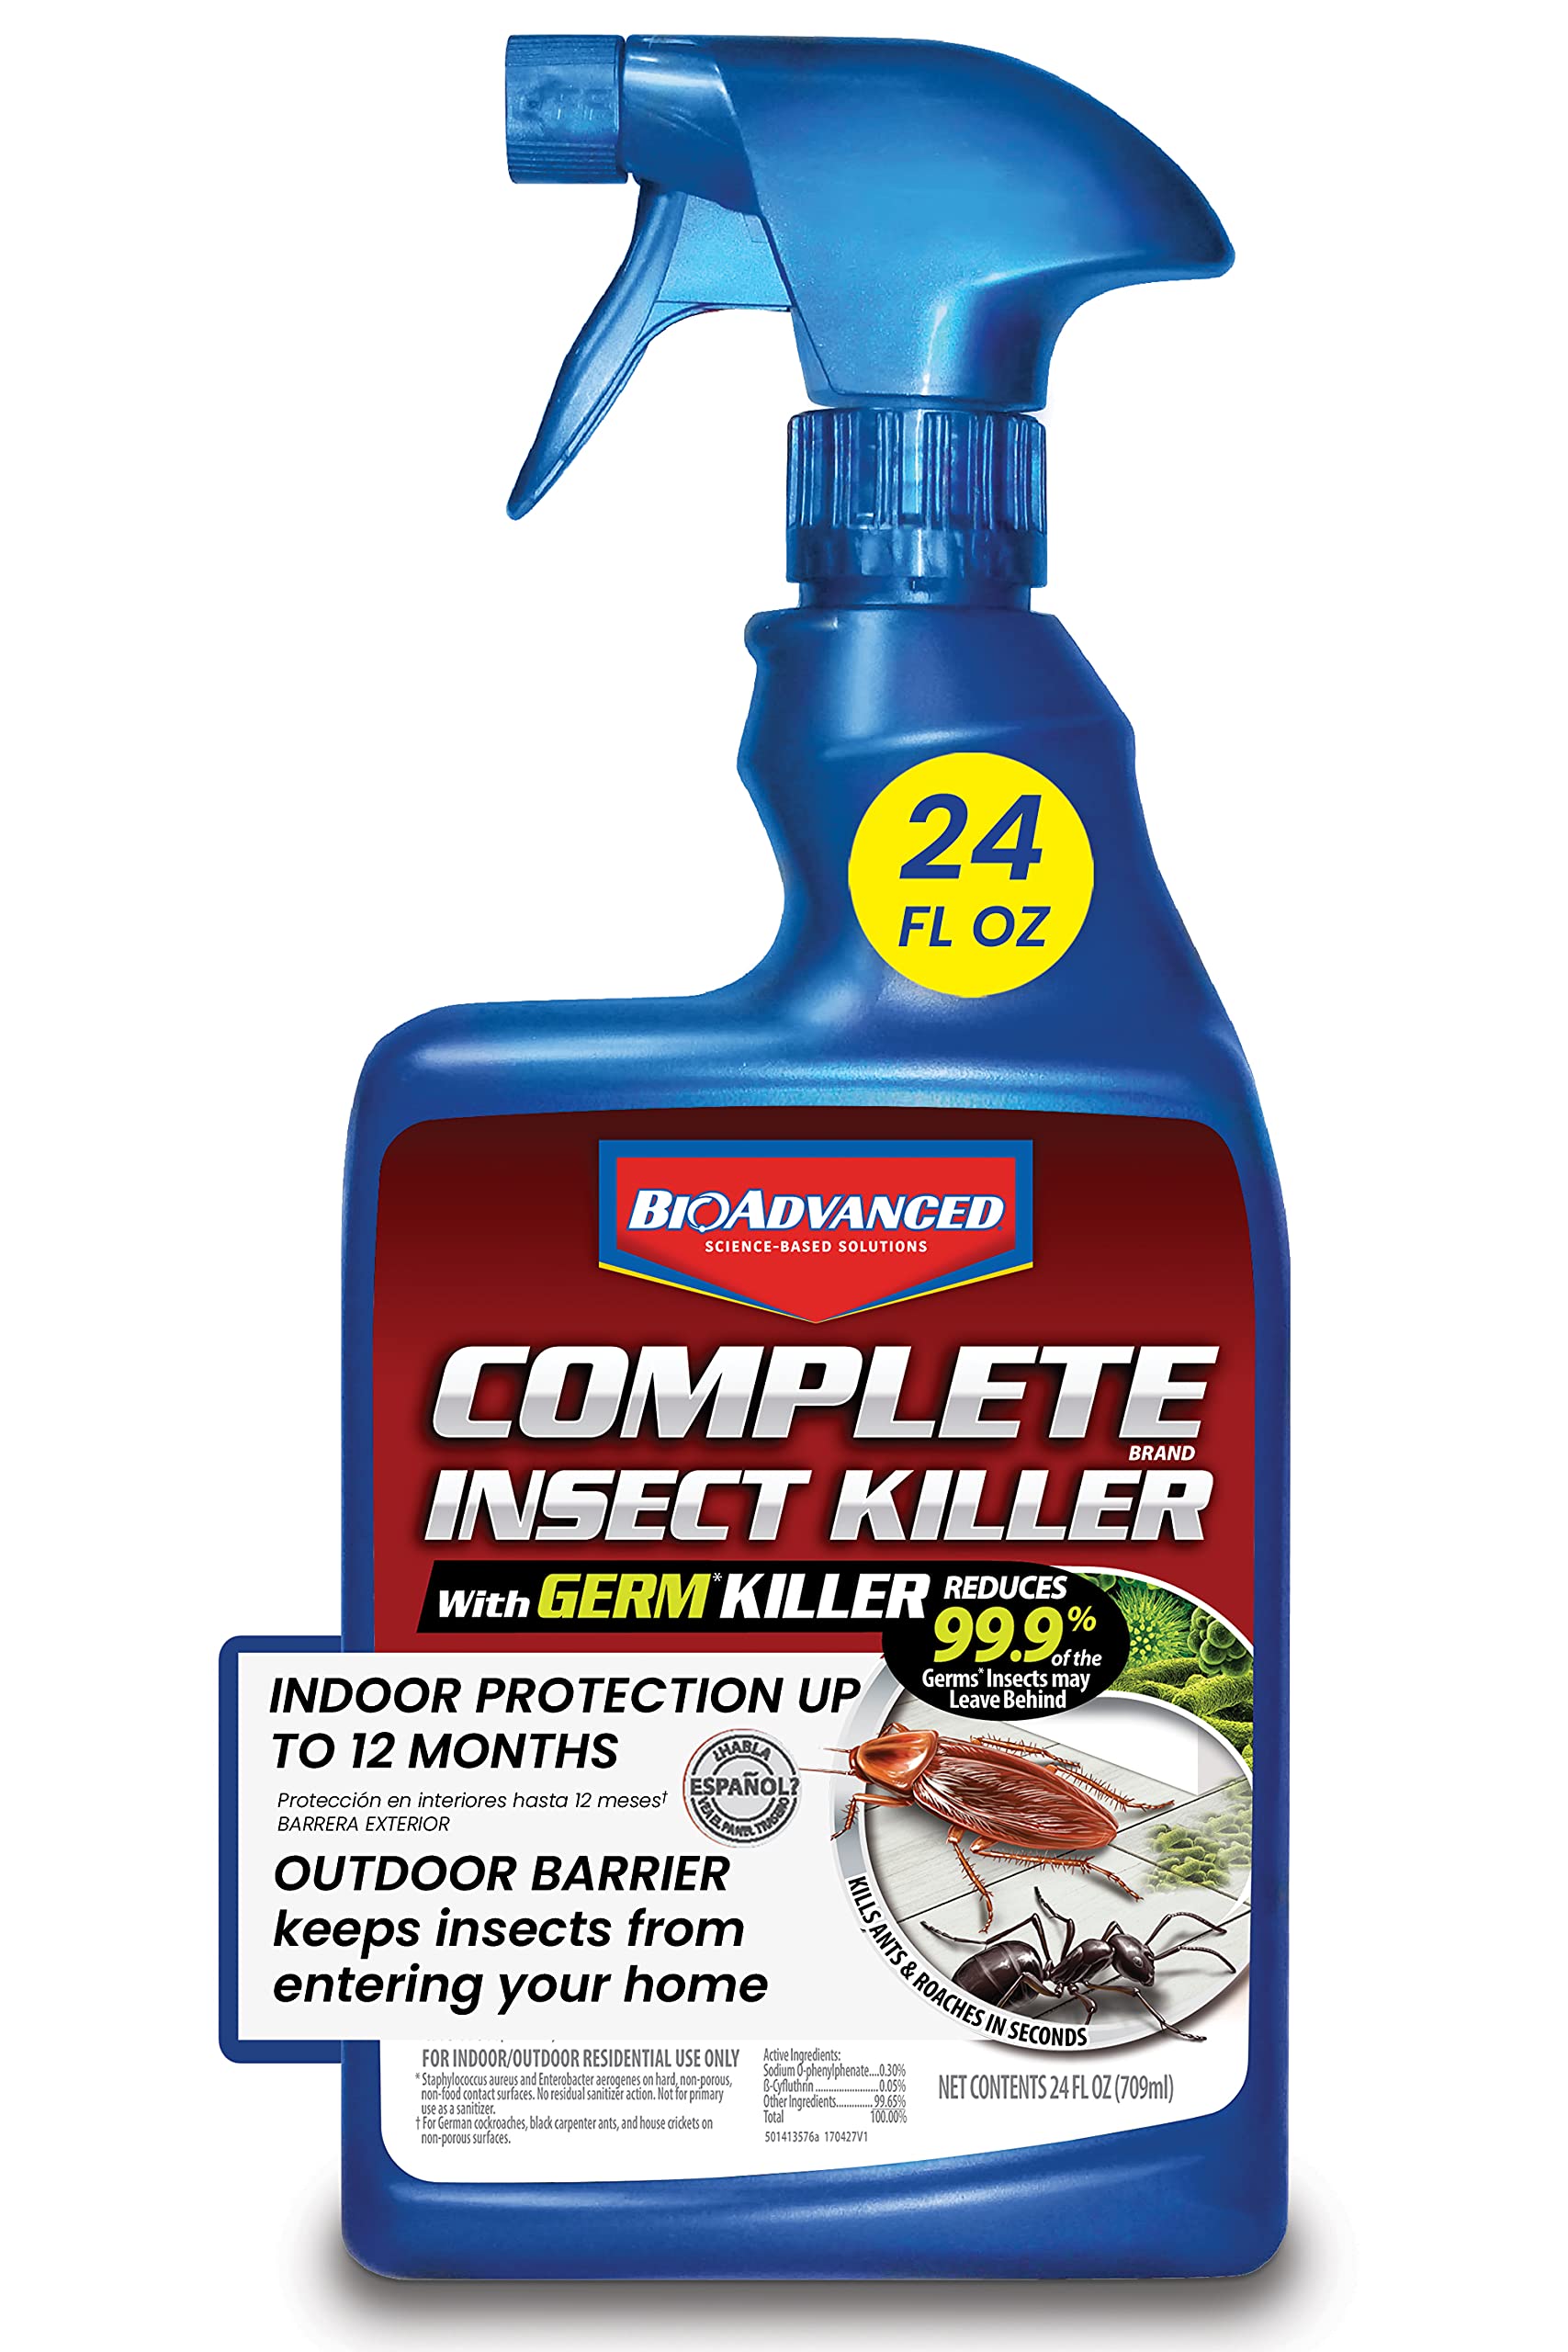 BioAdvanced Complete Insect Killer with Germ Killer, Ready-to-Use, 24 oz